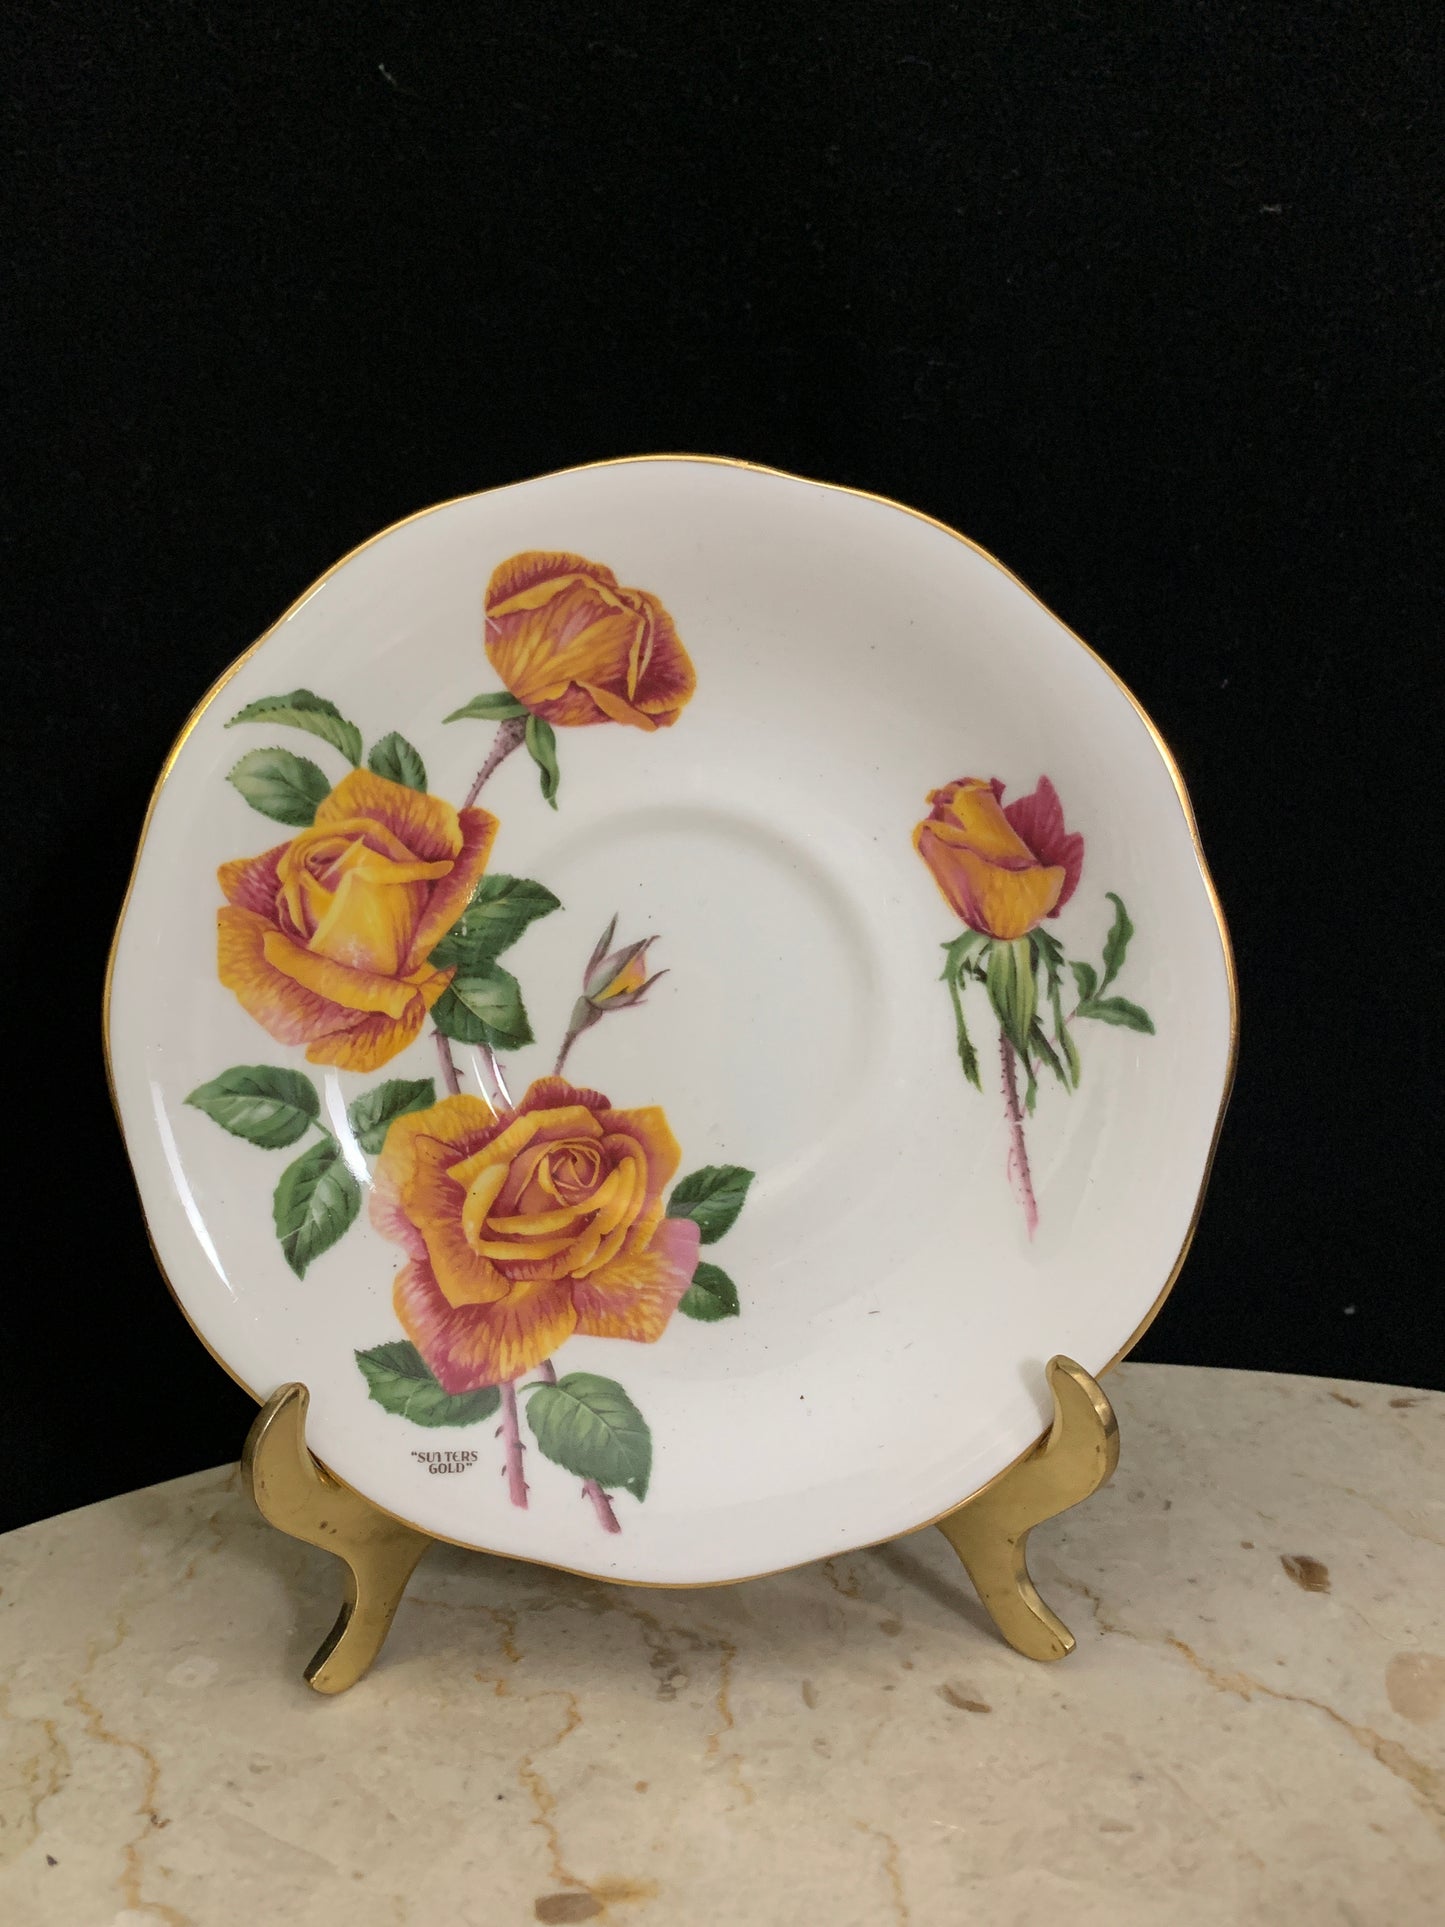 Royal Roses Vintage Tea Cup and Saucer White Teacup with Yellow and Pink Roses